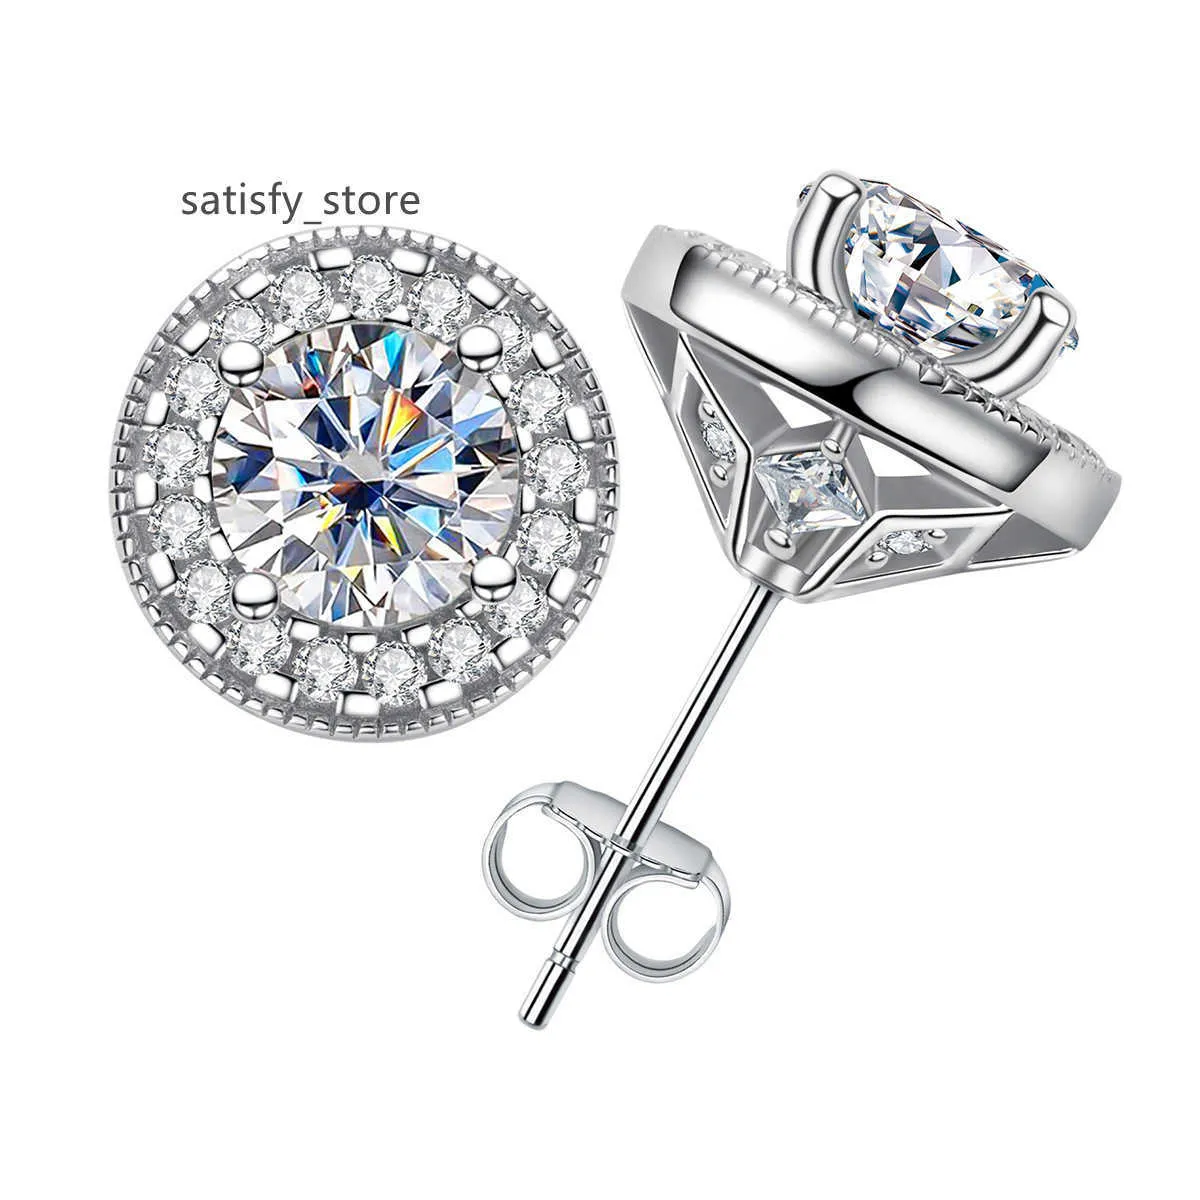 Hailer Jewelry Hot Sale 925 Sterling Silver Fine Jewelry 2.4CTW Passed Diamond Test Moissanite Halo Earring